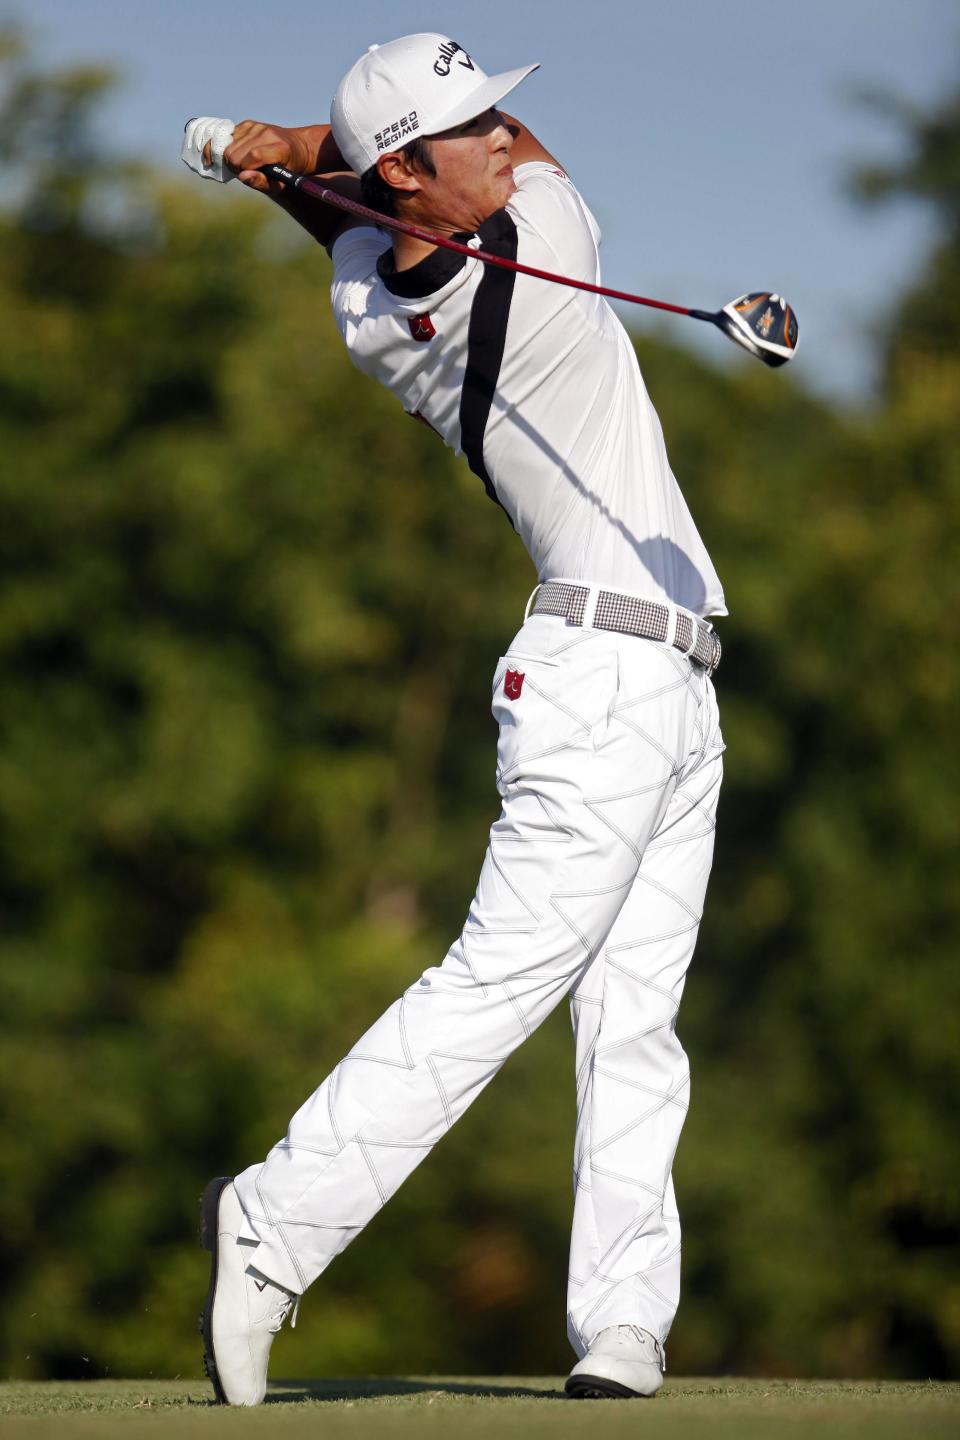 New Zealand's Danny Lee tees off from the 18th hole during the final round of the Puerto Rico Open PGA golf tournament in Rio Grande, Puerto Rico, Sunday, March 9, 2014. (AP Photo/Ricardo Arduengo)